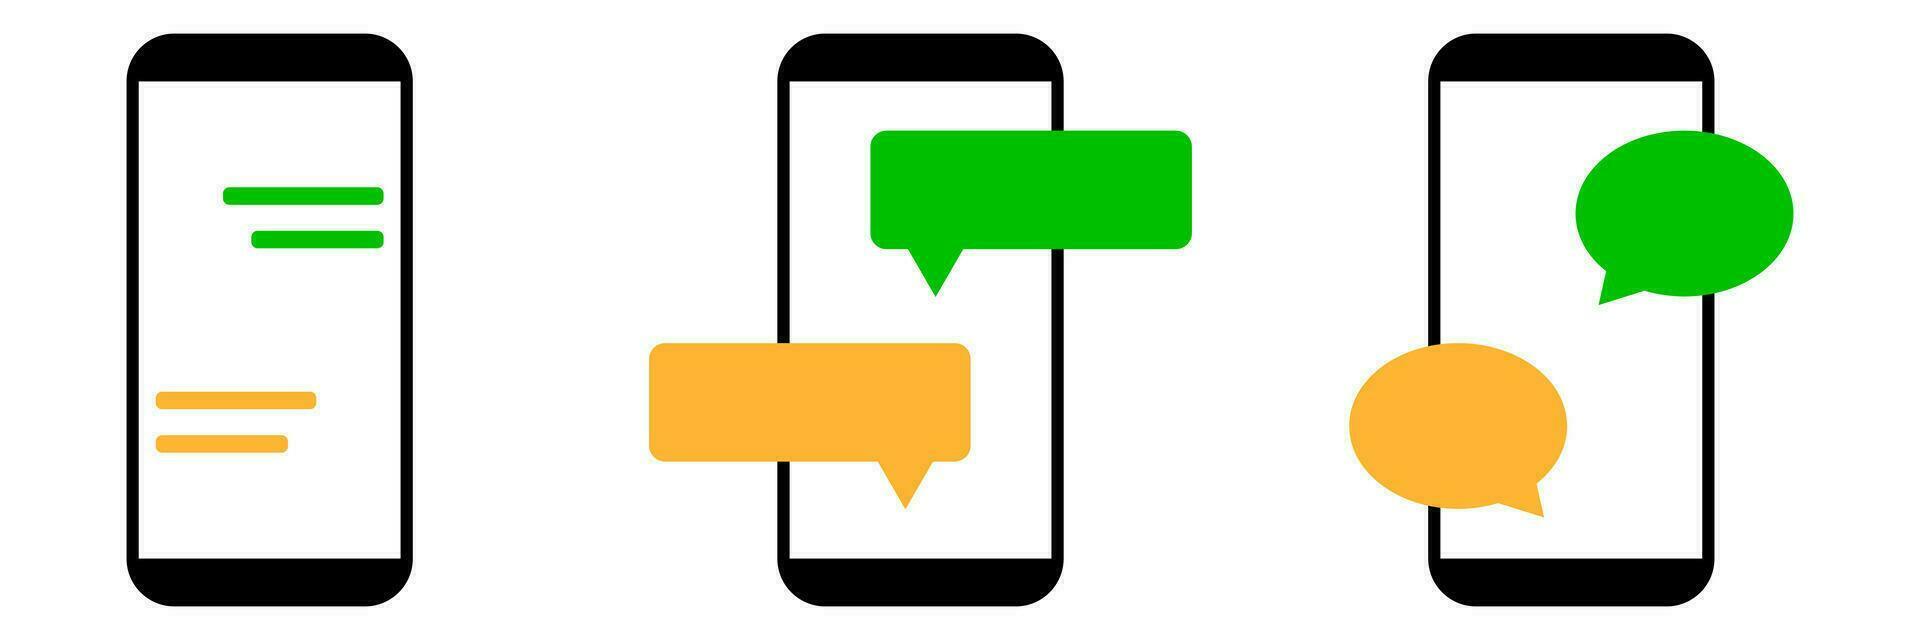 Conversation chat with smartphone icon. Isolated text message set on white background. Sms sign in speech bubble design. Texting message in green and red. Notification symbol. EPS 10. vector